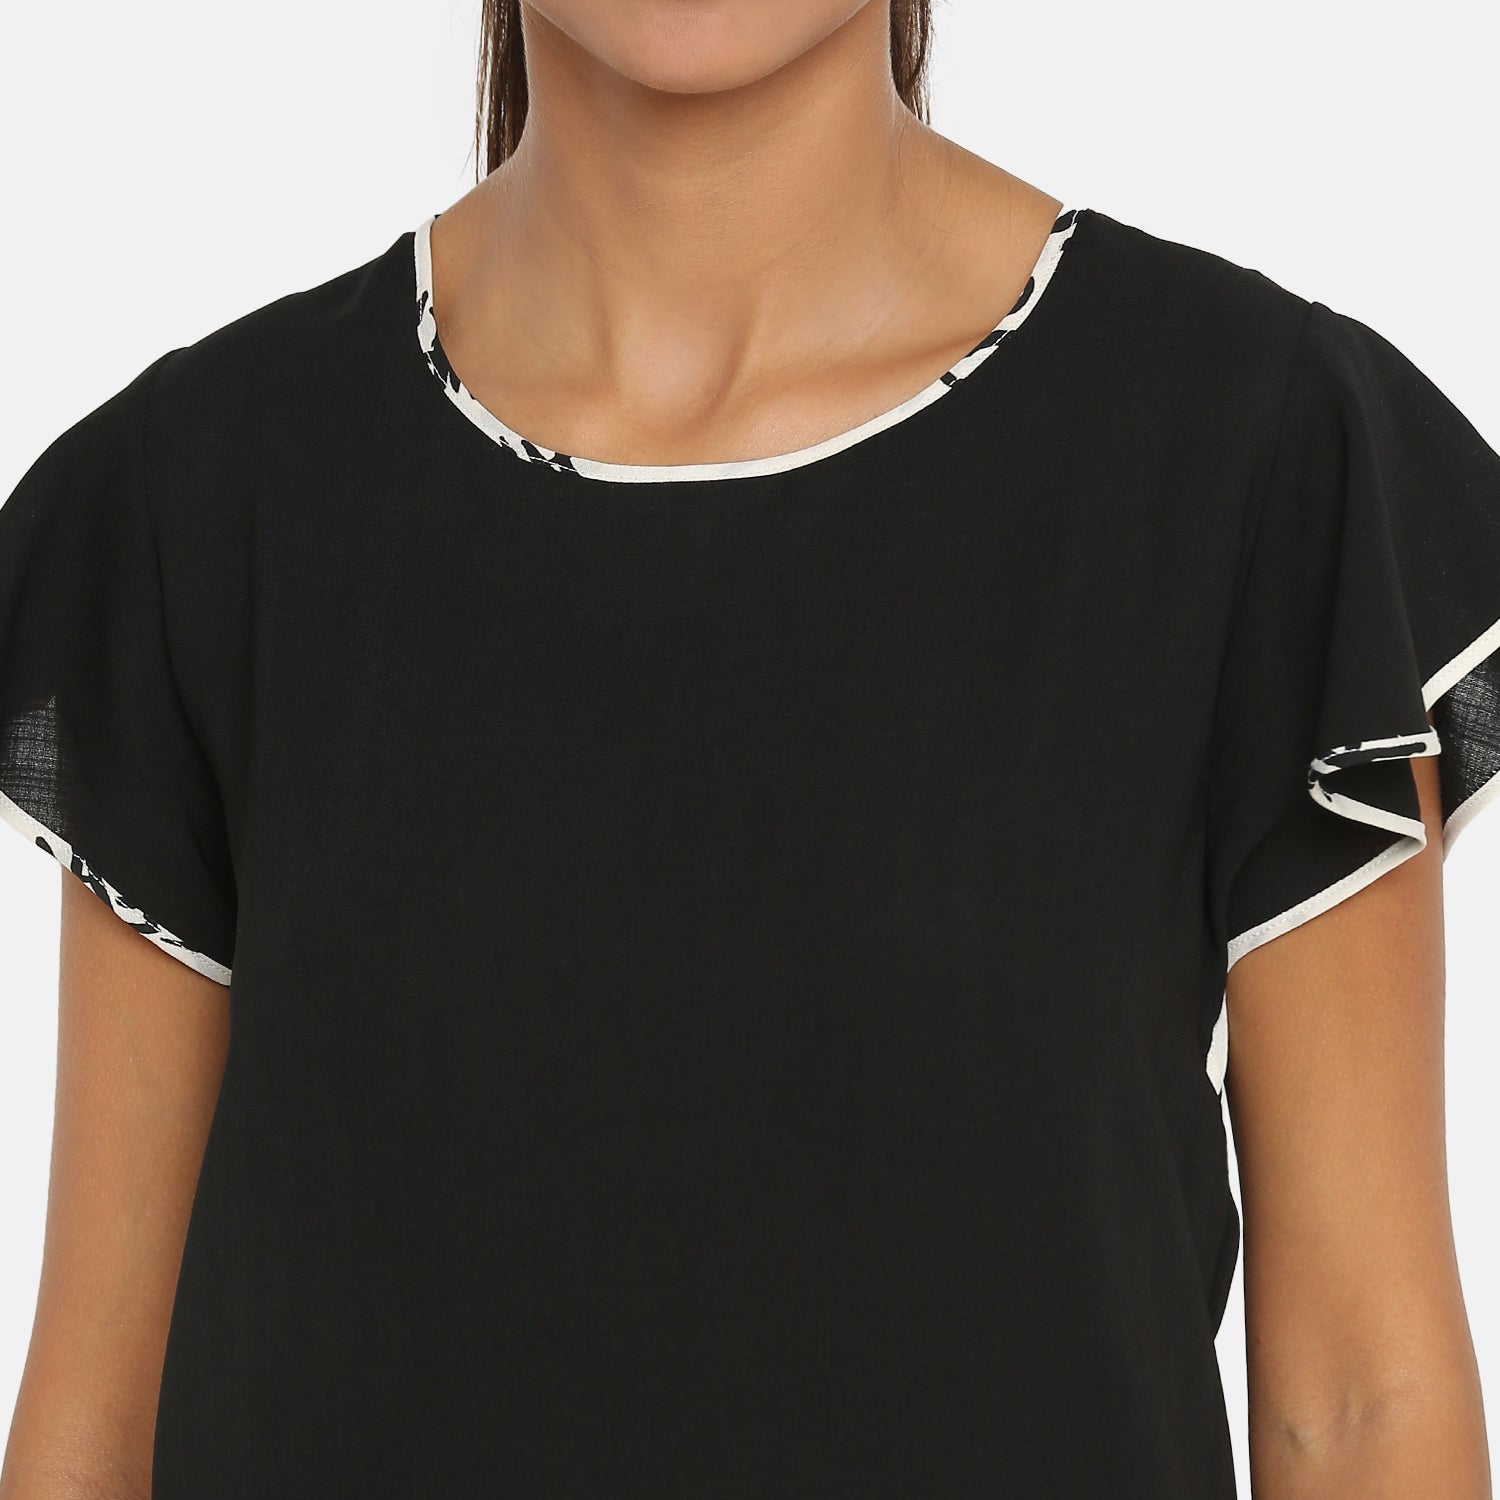 Black top with frill on side seam with contrast pining